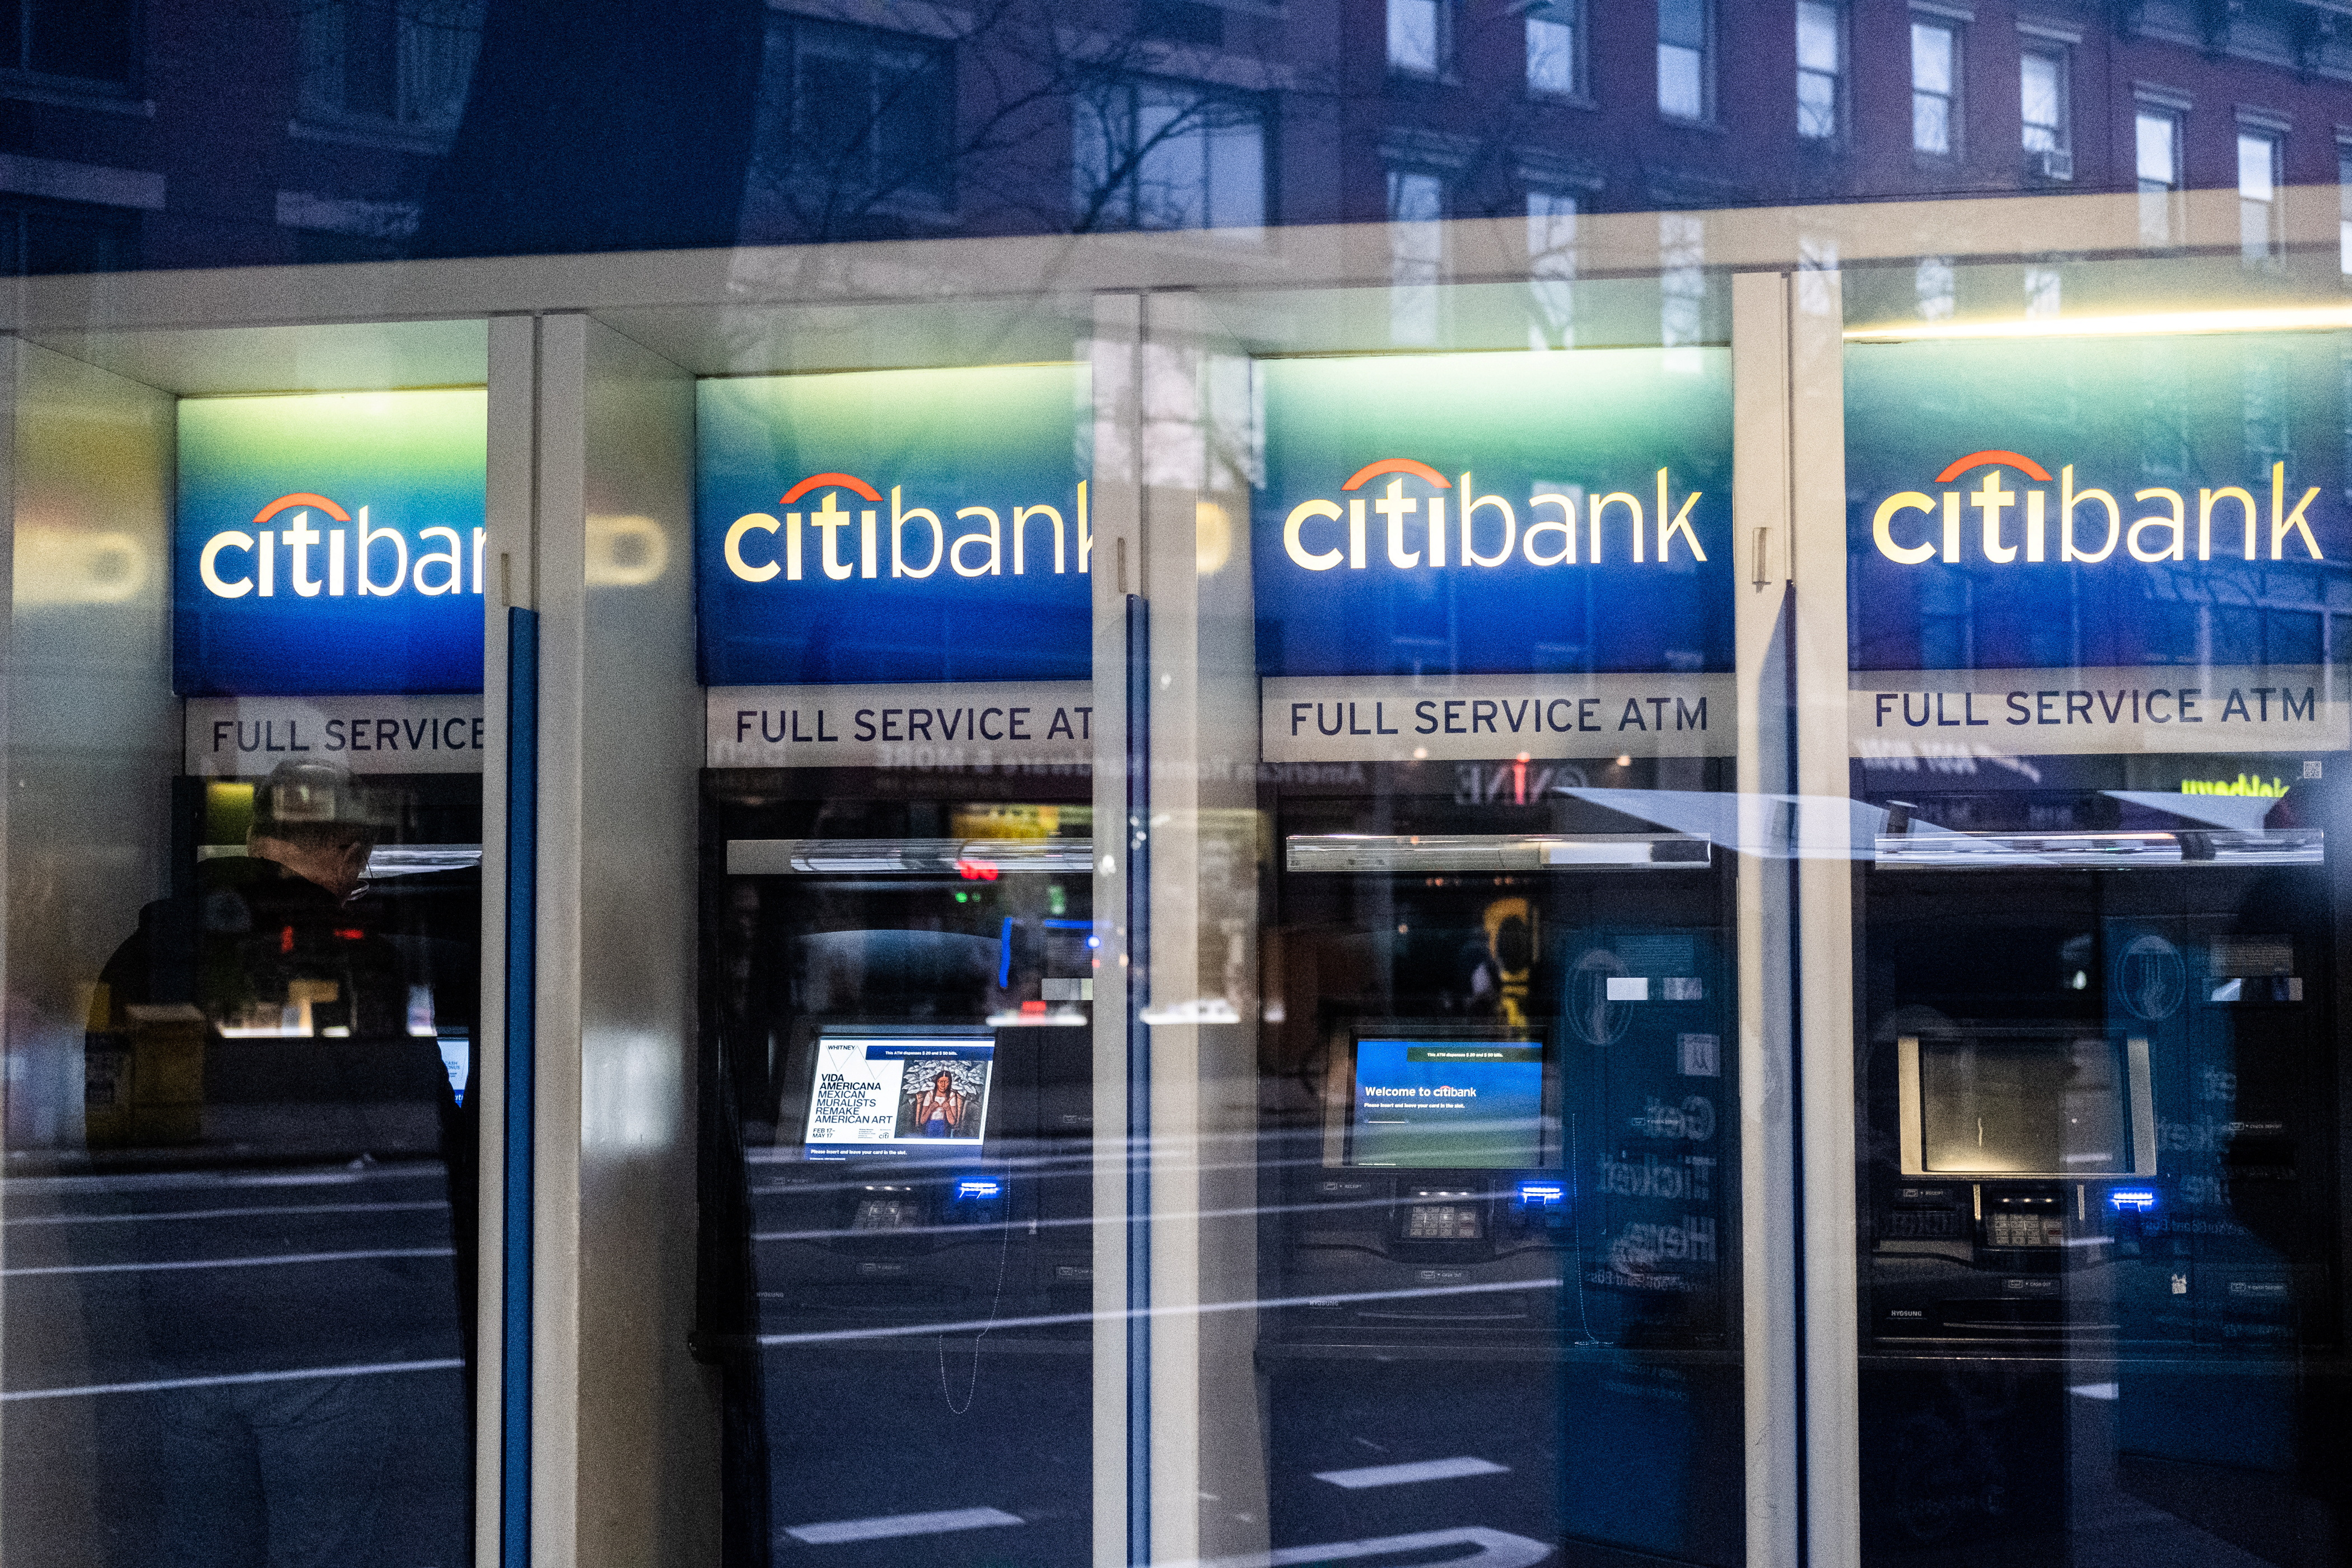 FILE PHOTO: Citi bank ATM machines are seen in New York